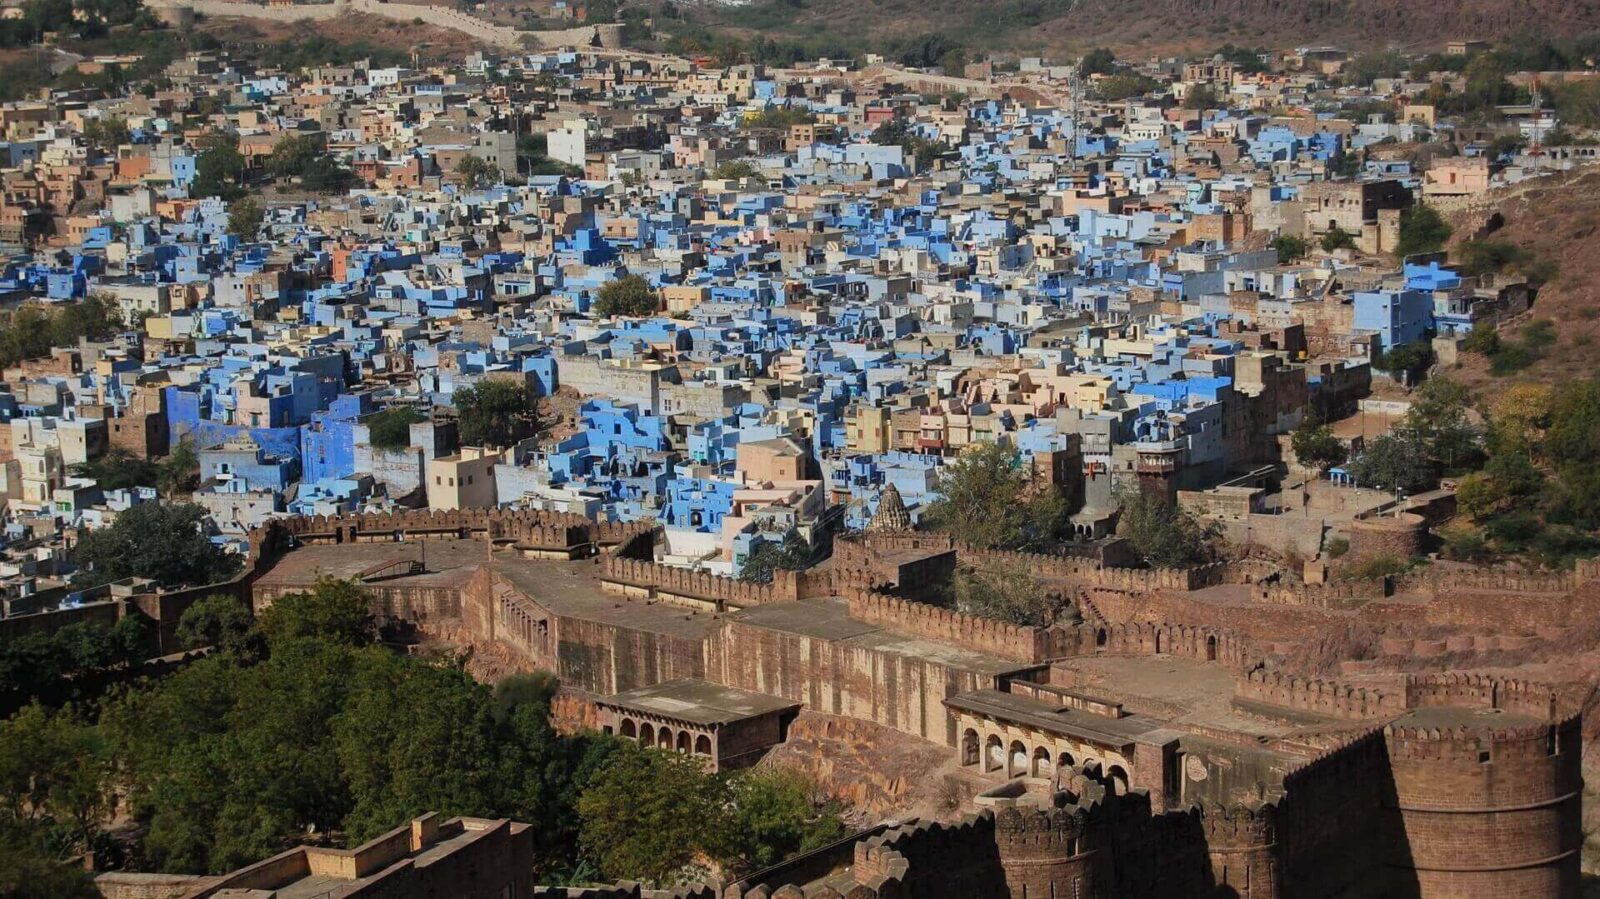 Jasmine Trails Header. In the image is the Blue City of Jodhpur in Rajasthan India